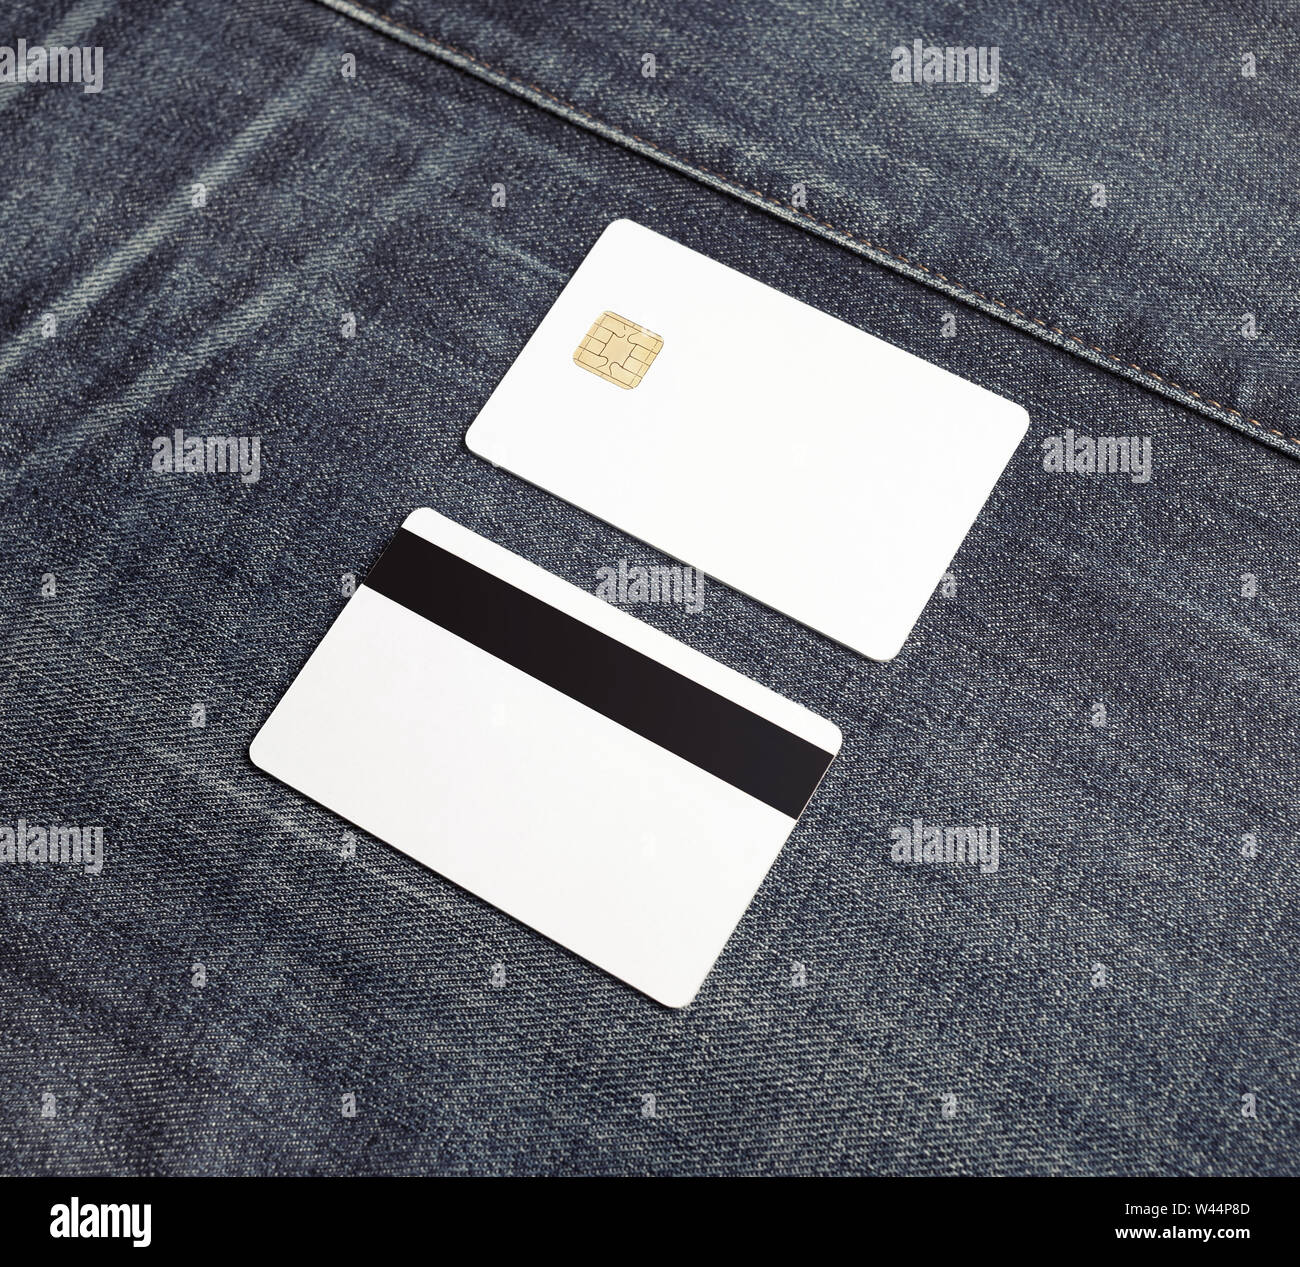 Two blank credit cards on gray denim background. Bank cards. Front and back view. Stock Photo